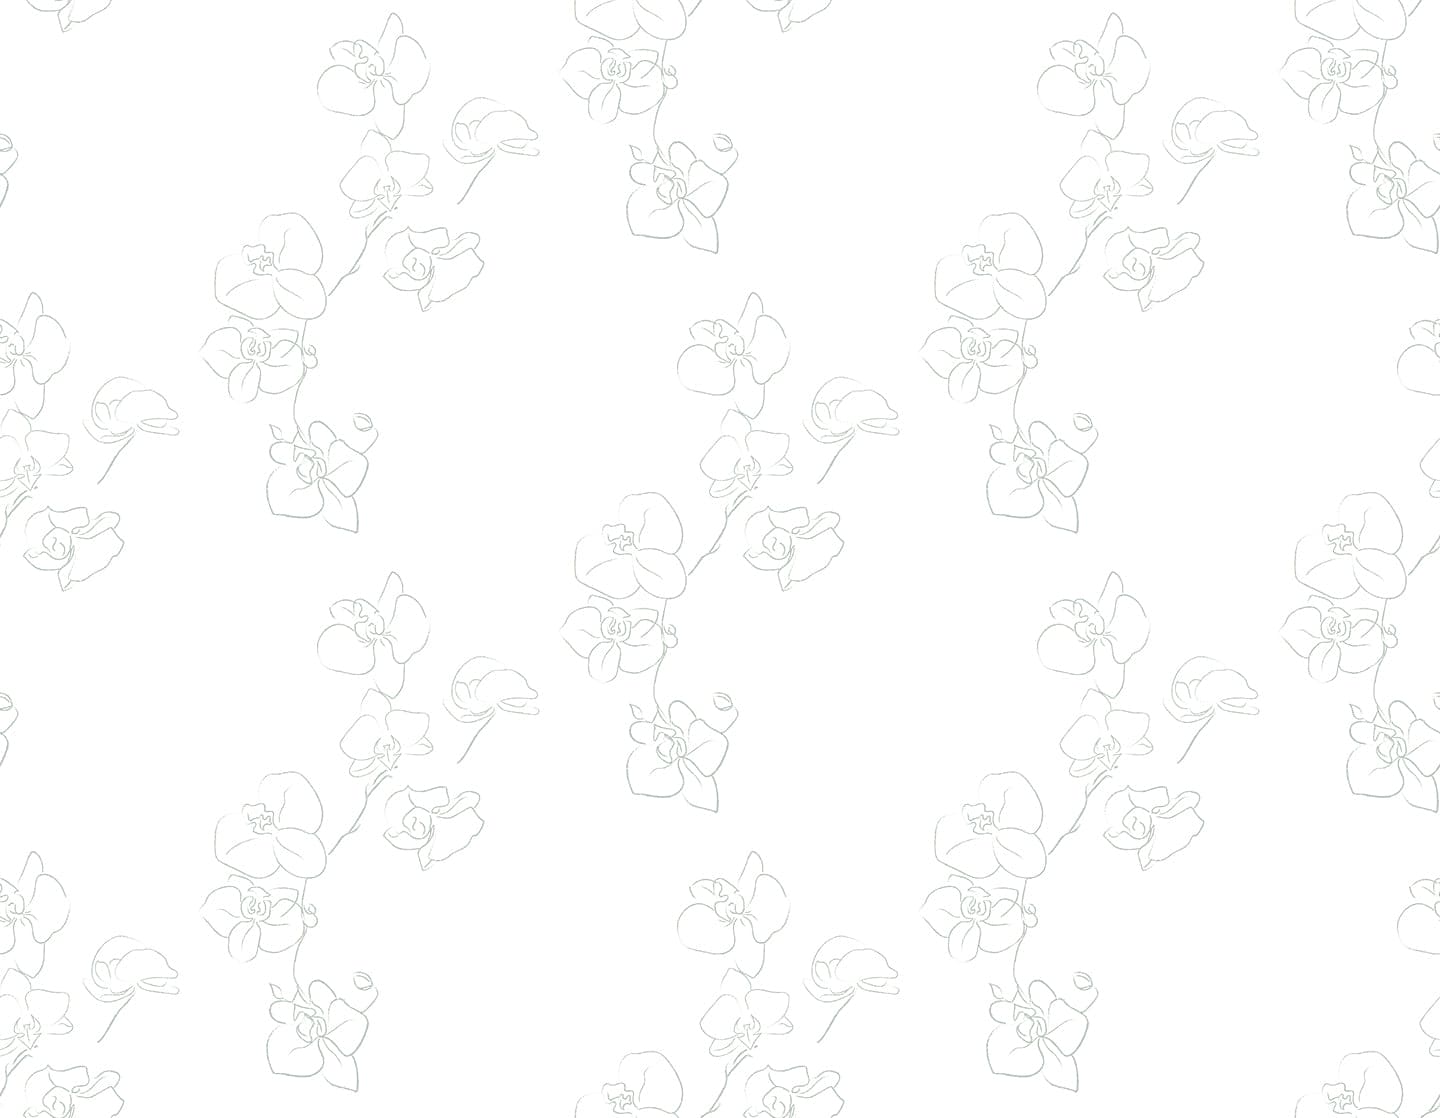 A close-up view of the Floral Line Art Wallpaper featuring delicate hand-drawn flowers and branches in a continuous line style on a clean white background